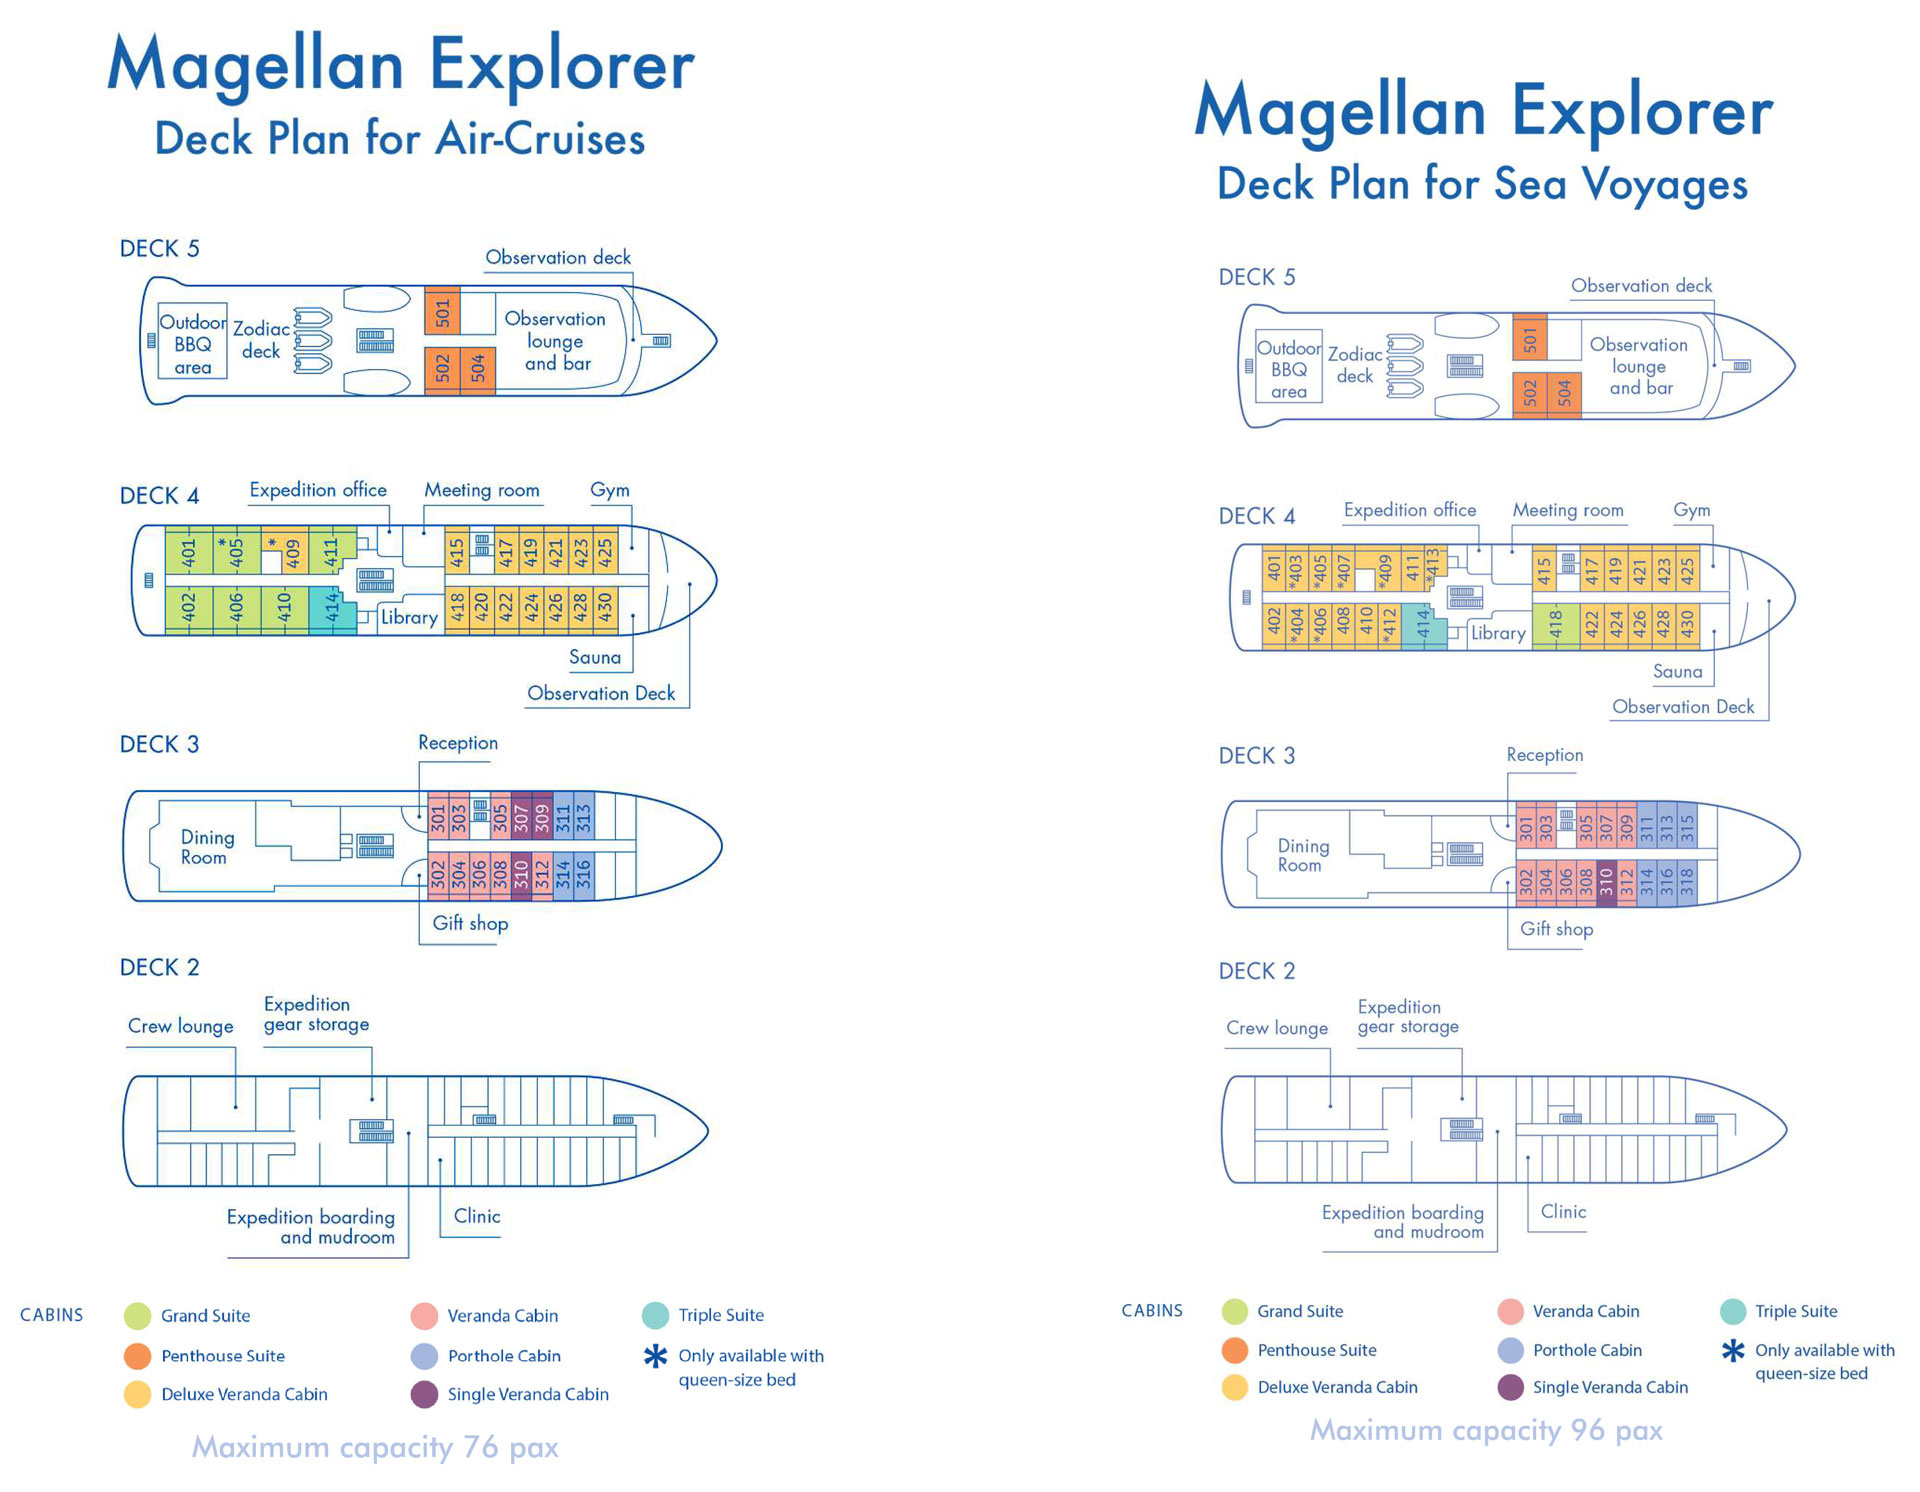 Two deck plans for polar ship Magellan Explorer, showing capacity for 76 or 96 guests across 3 decks.